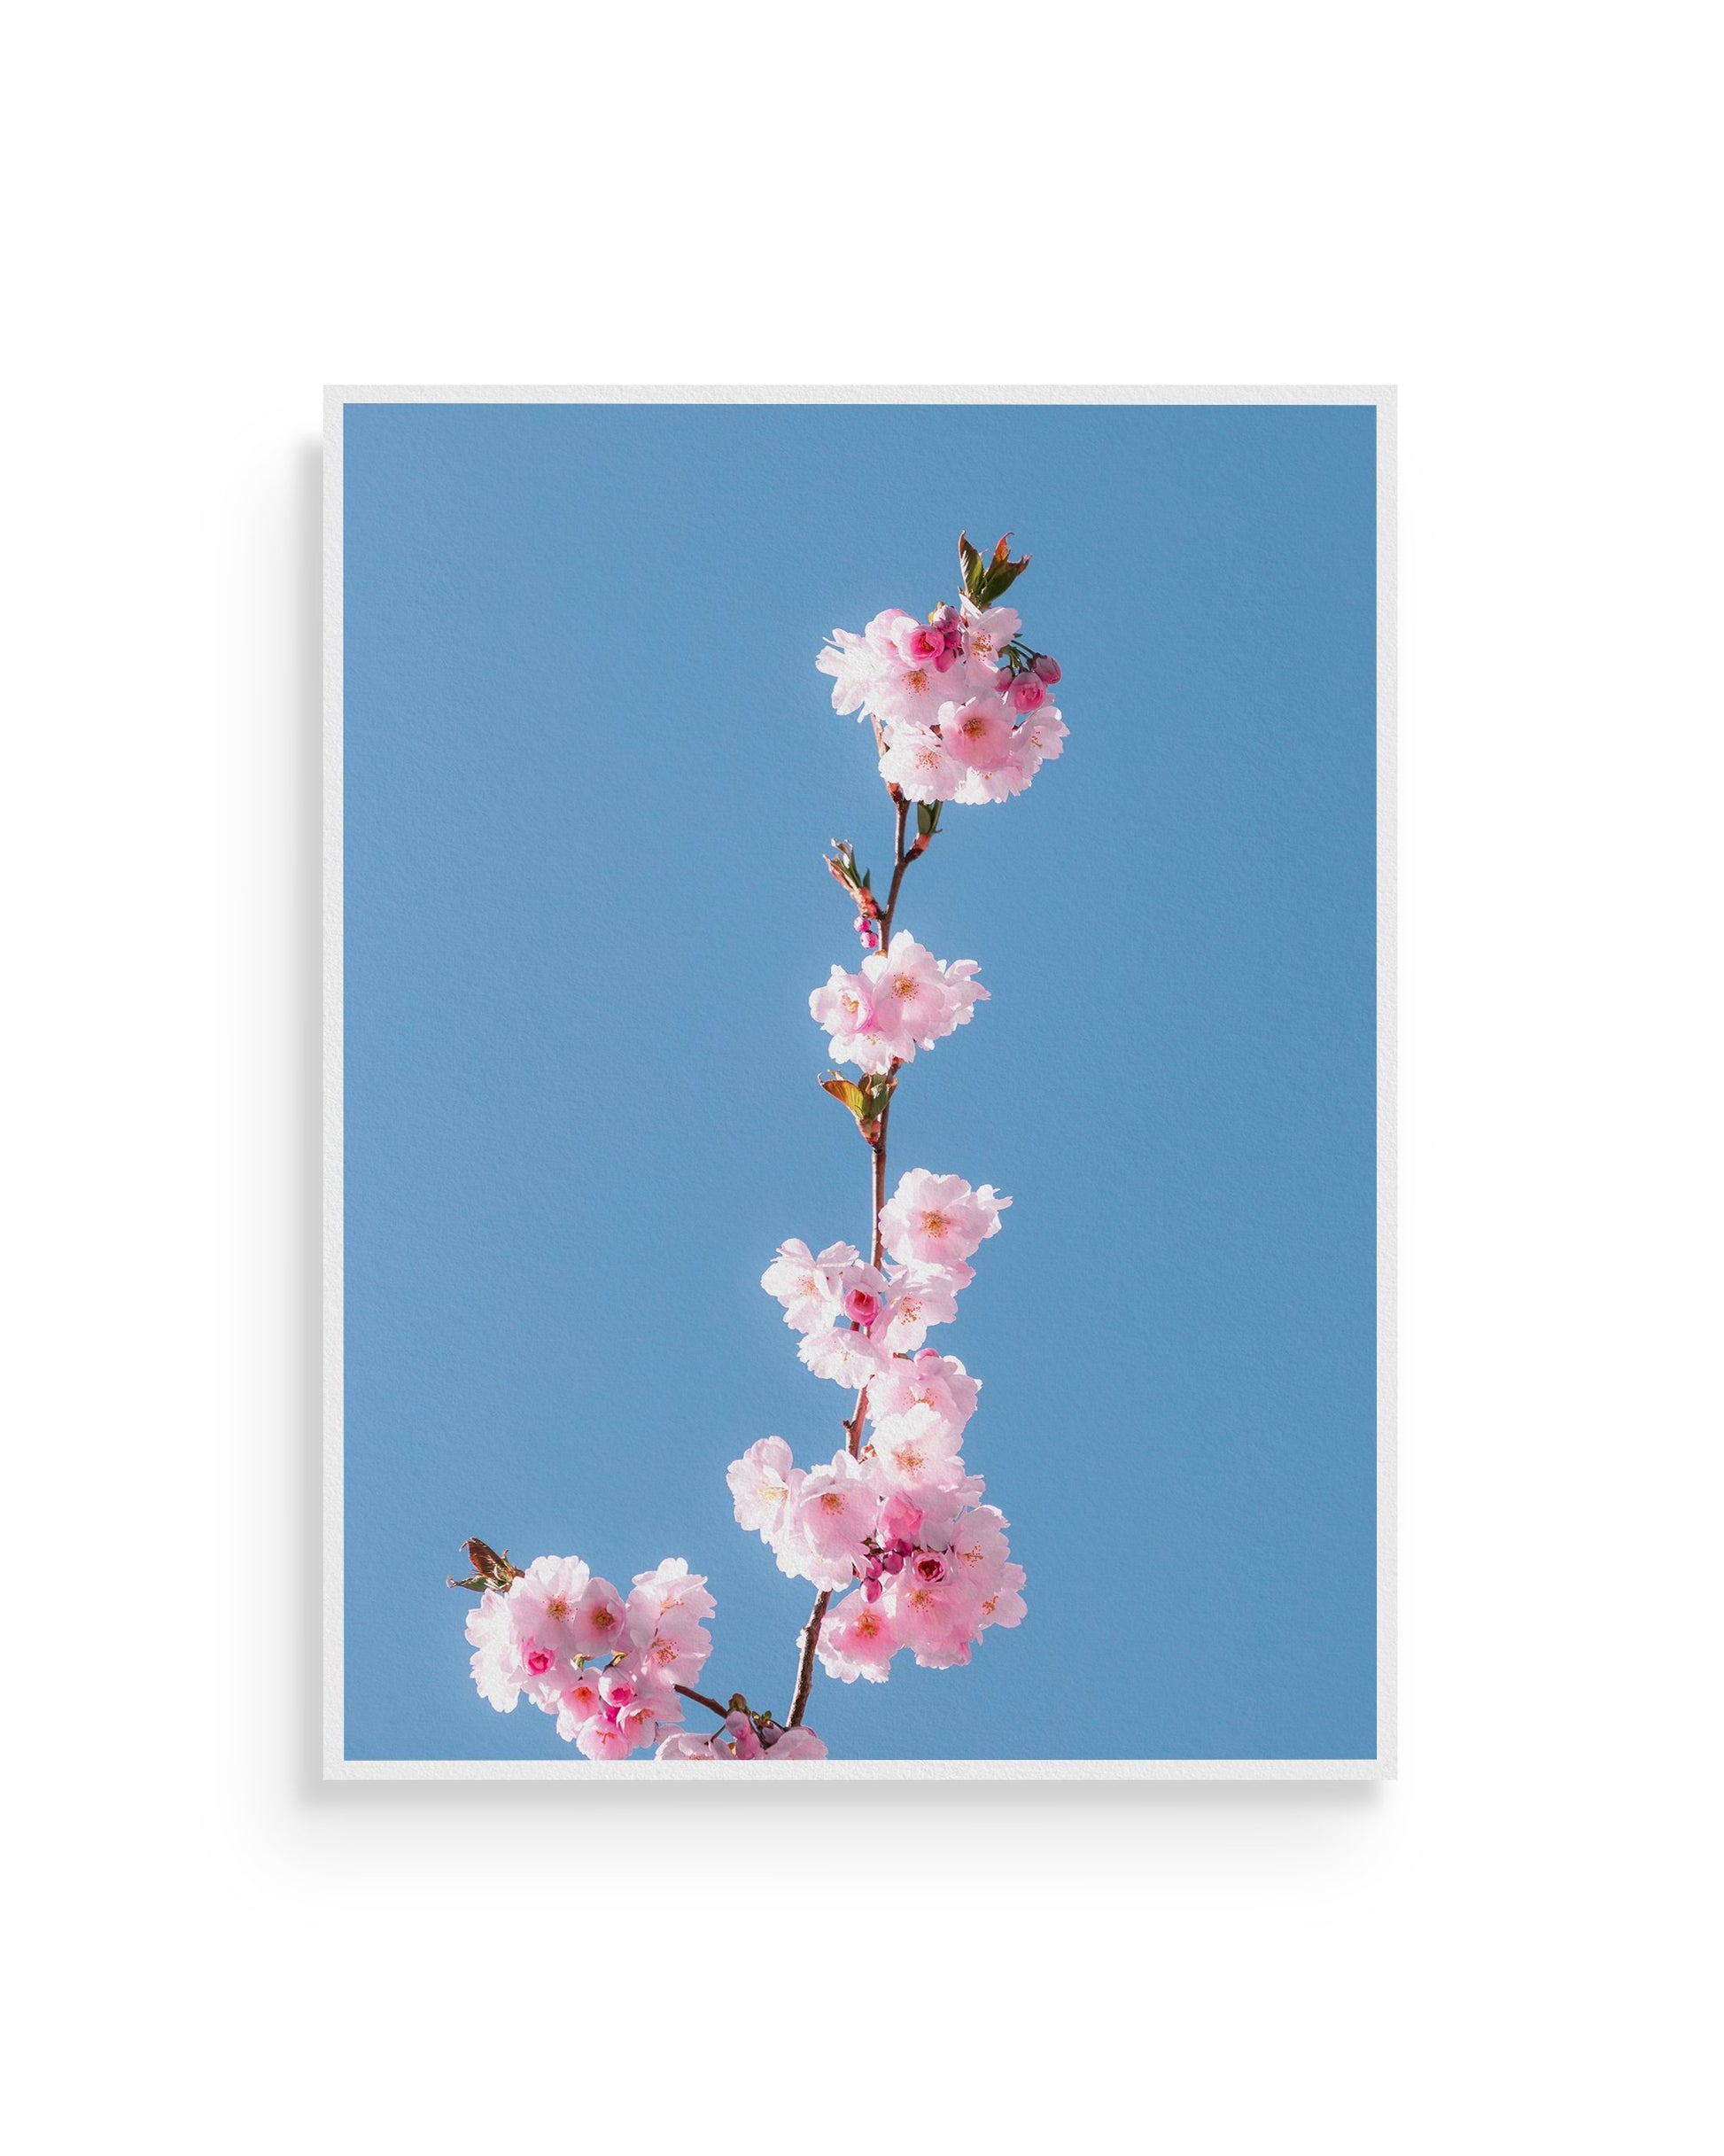 Fine-art print called First blossom from Kaj on the wall